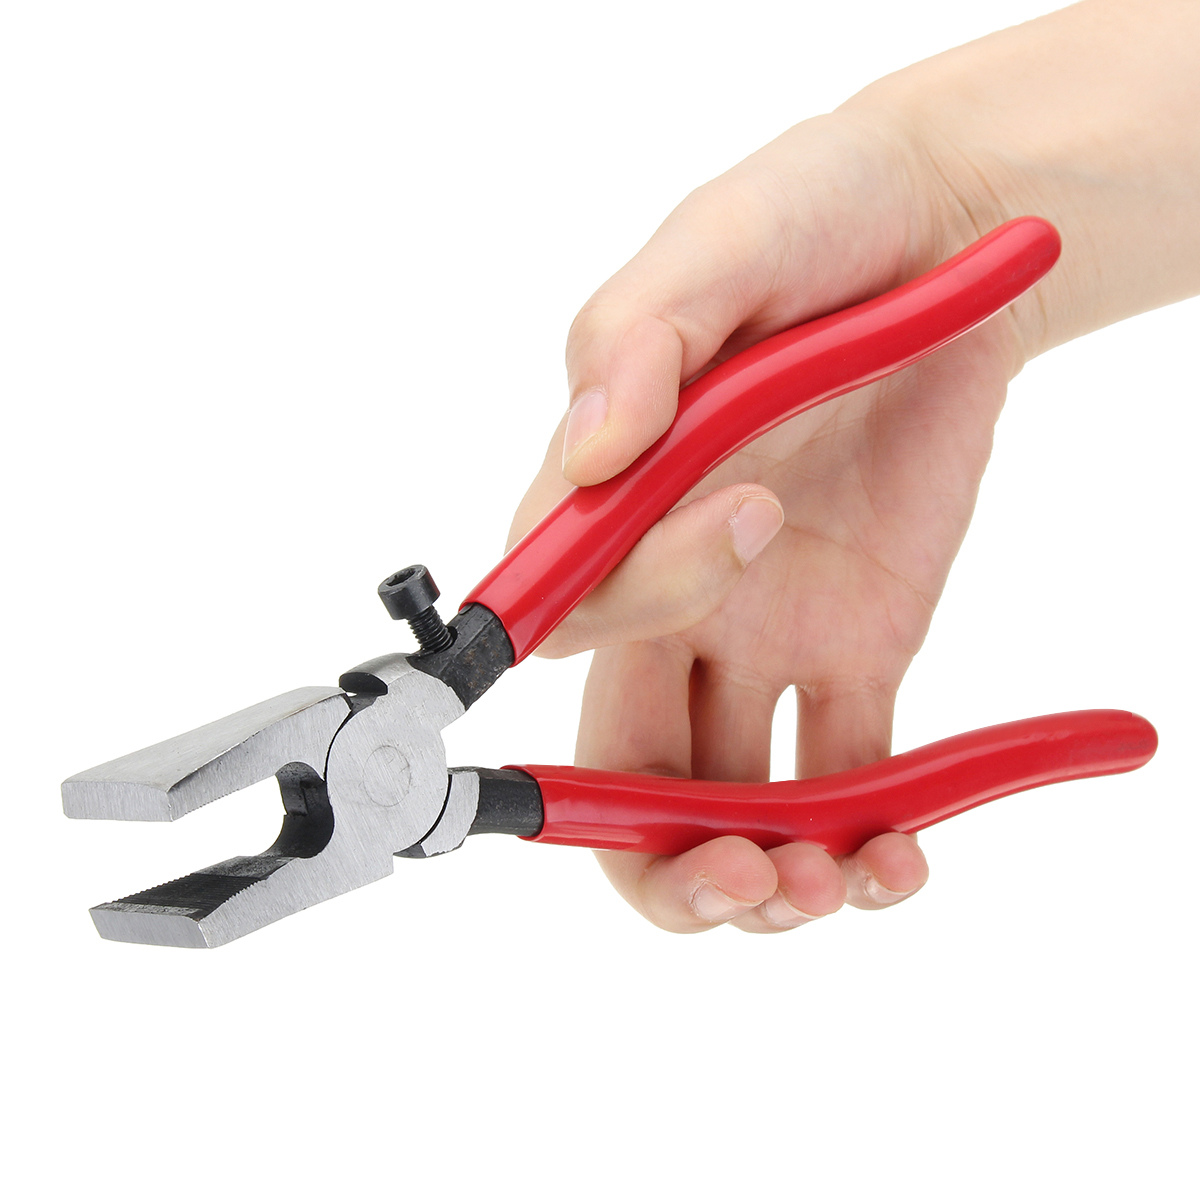 Stained-Glass-Tool-Kit-Running-Pliers-Breaking-Grozing-Pliers-Grip-Cutter-Non-slip-Handle-1334030-7